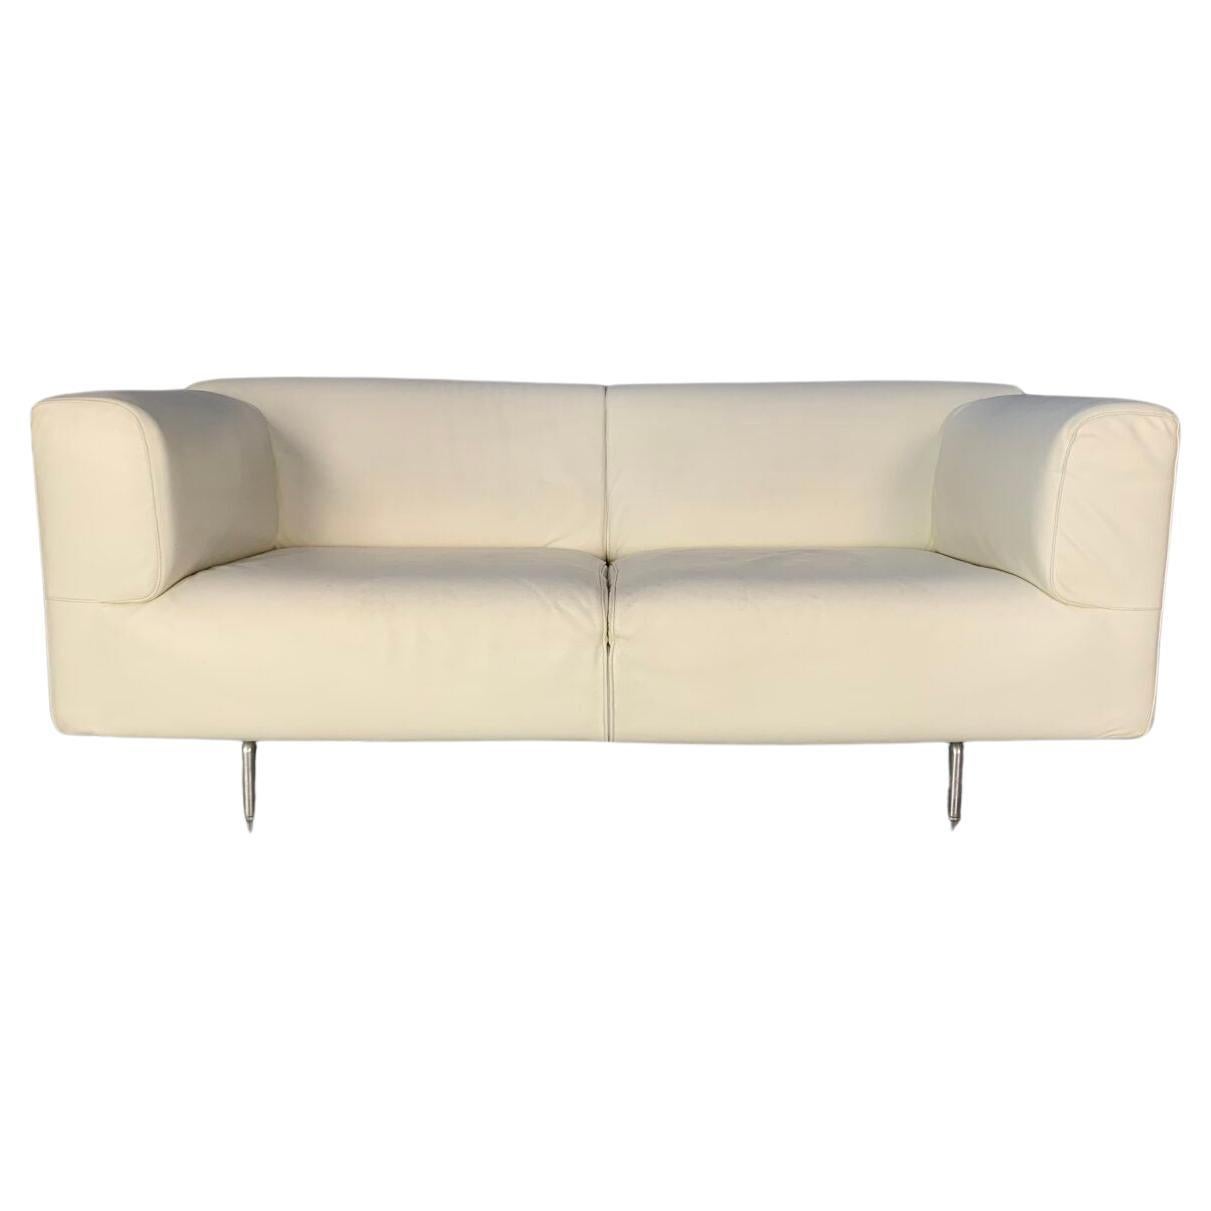 Cassina "250 Met" Large 2-Seat Sofa - In White Leather For Sale